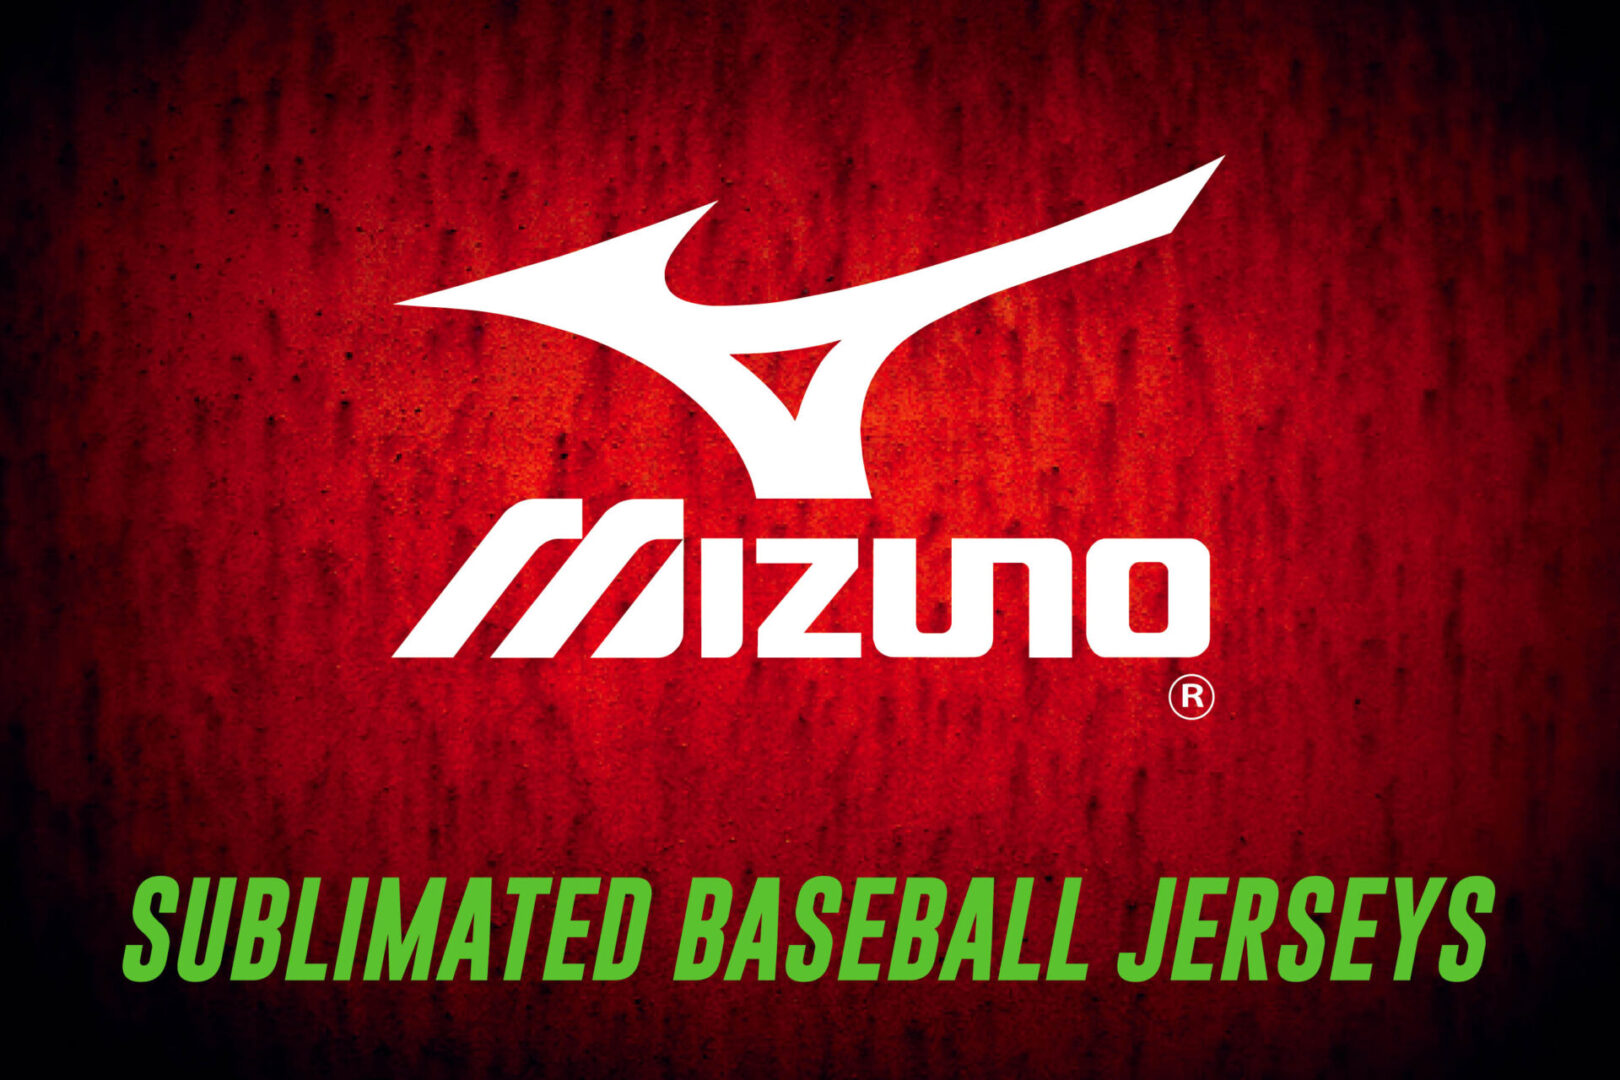 A red background with the mizuno logo.